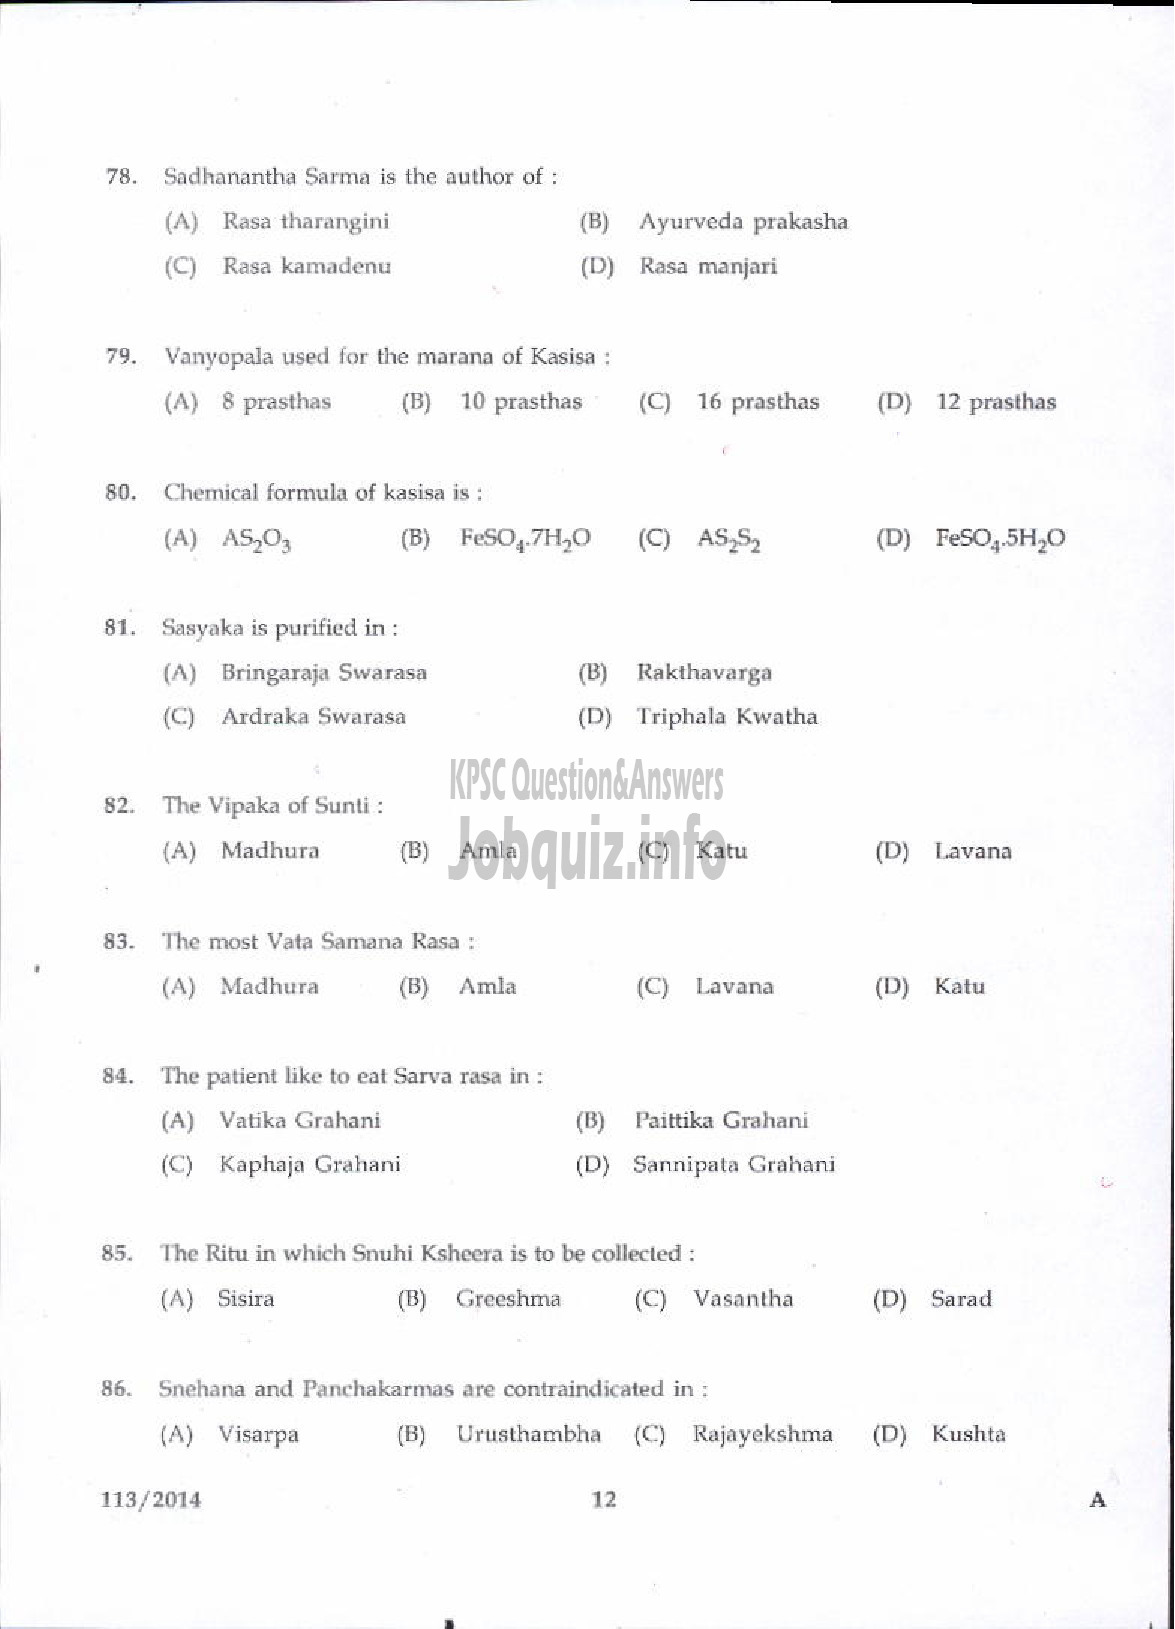 Kerala PSC Question Paper - DRUGS INSPECTOR AYURVEDA DRUGS CONTROL-10